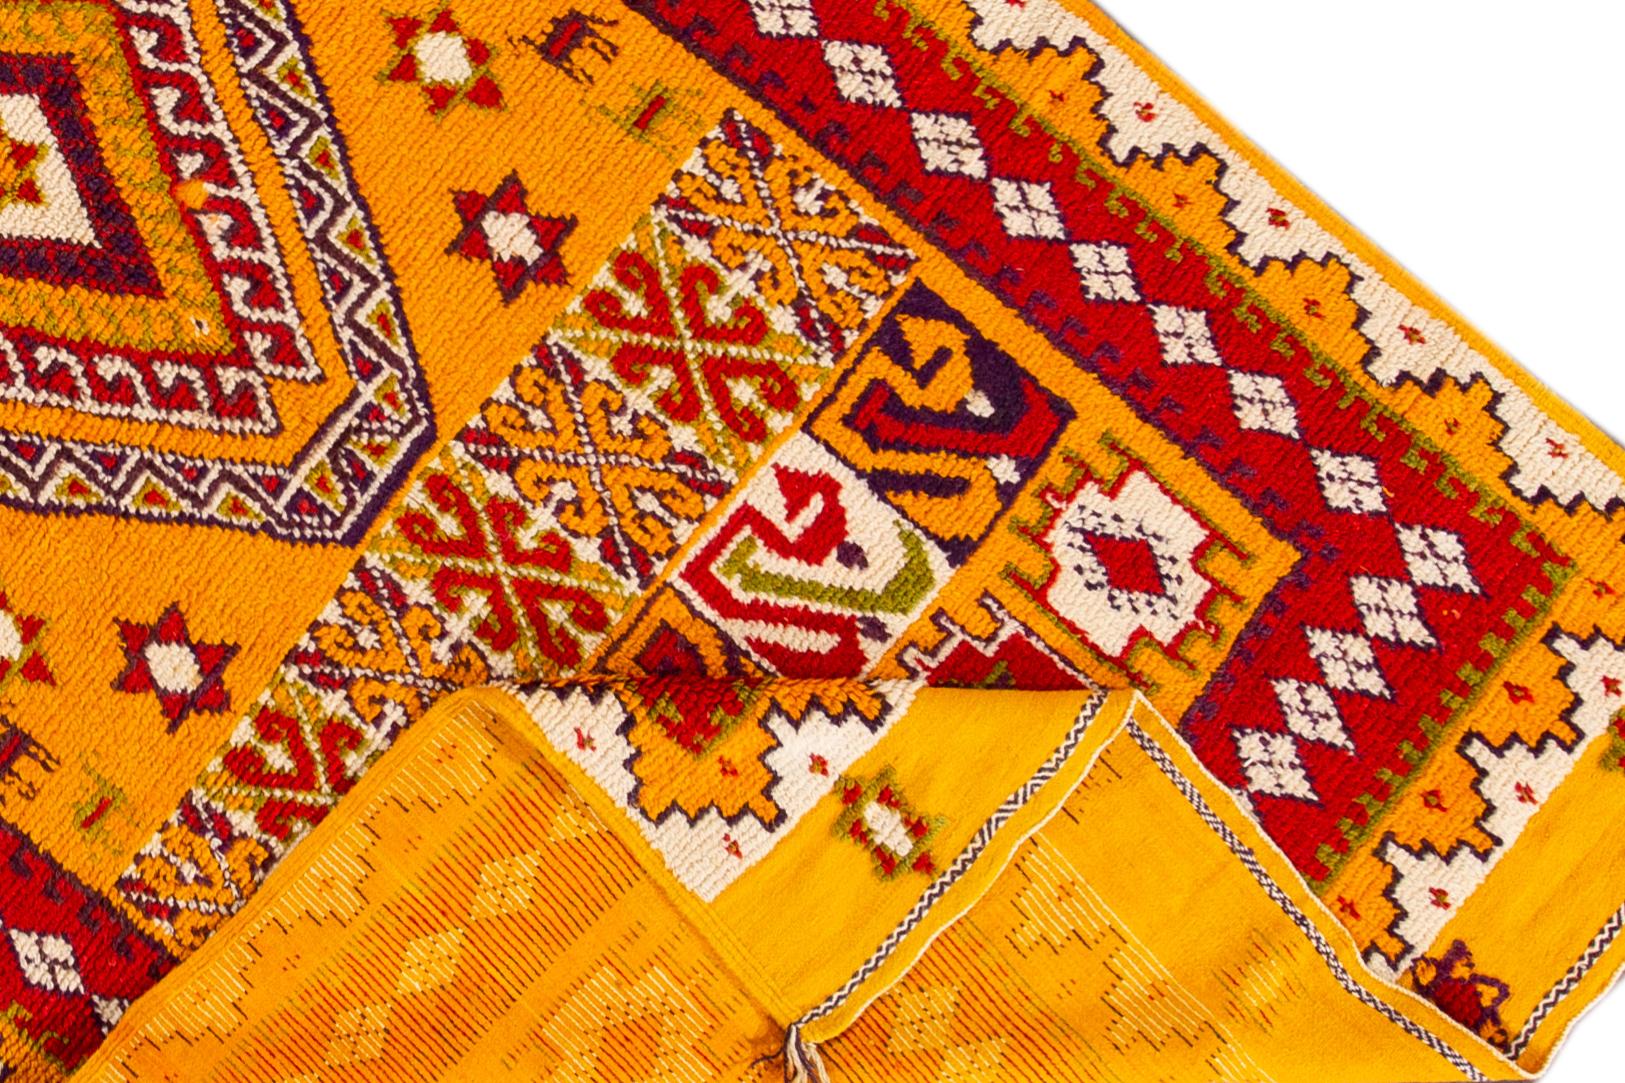 Beautiful vintage Moroccan Tribal rug, hand-knotted wool with an orange field, red and ivory accents in an all-over classic medallion tribal design.

This rug measures 4' 10